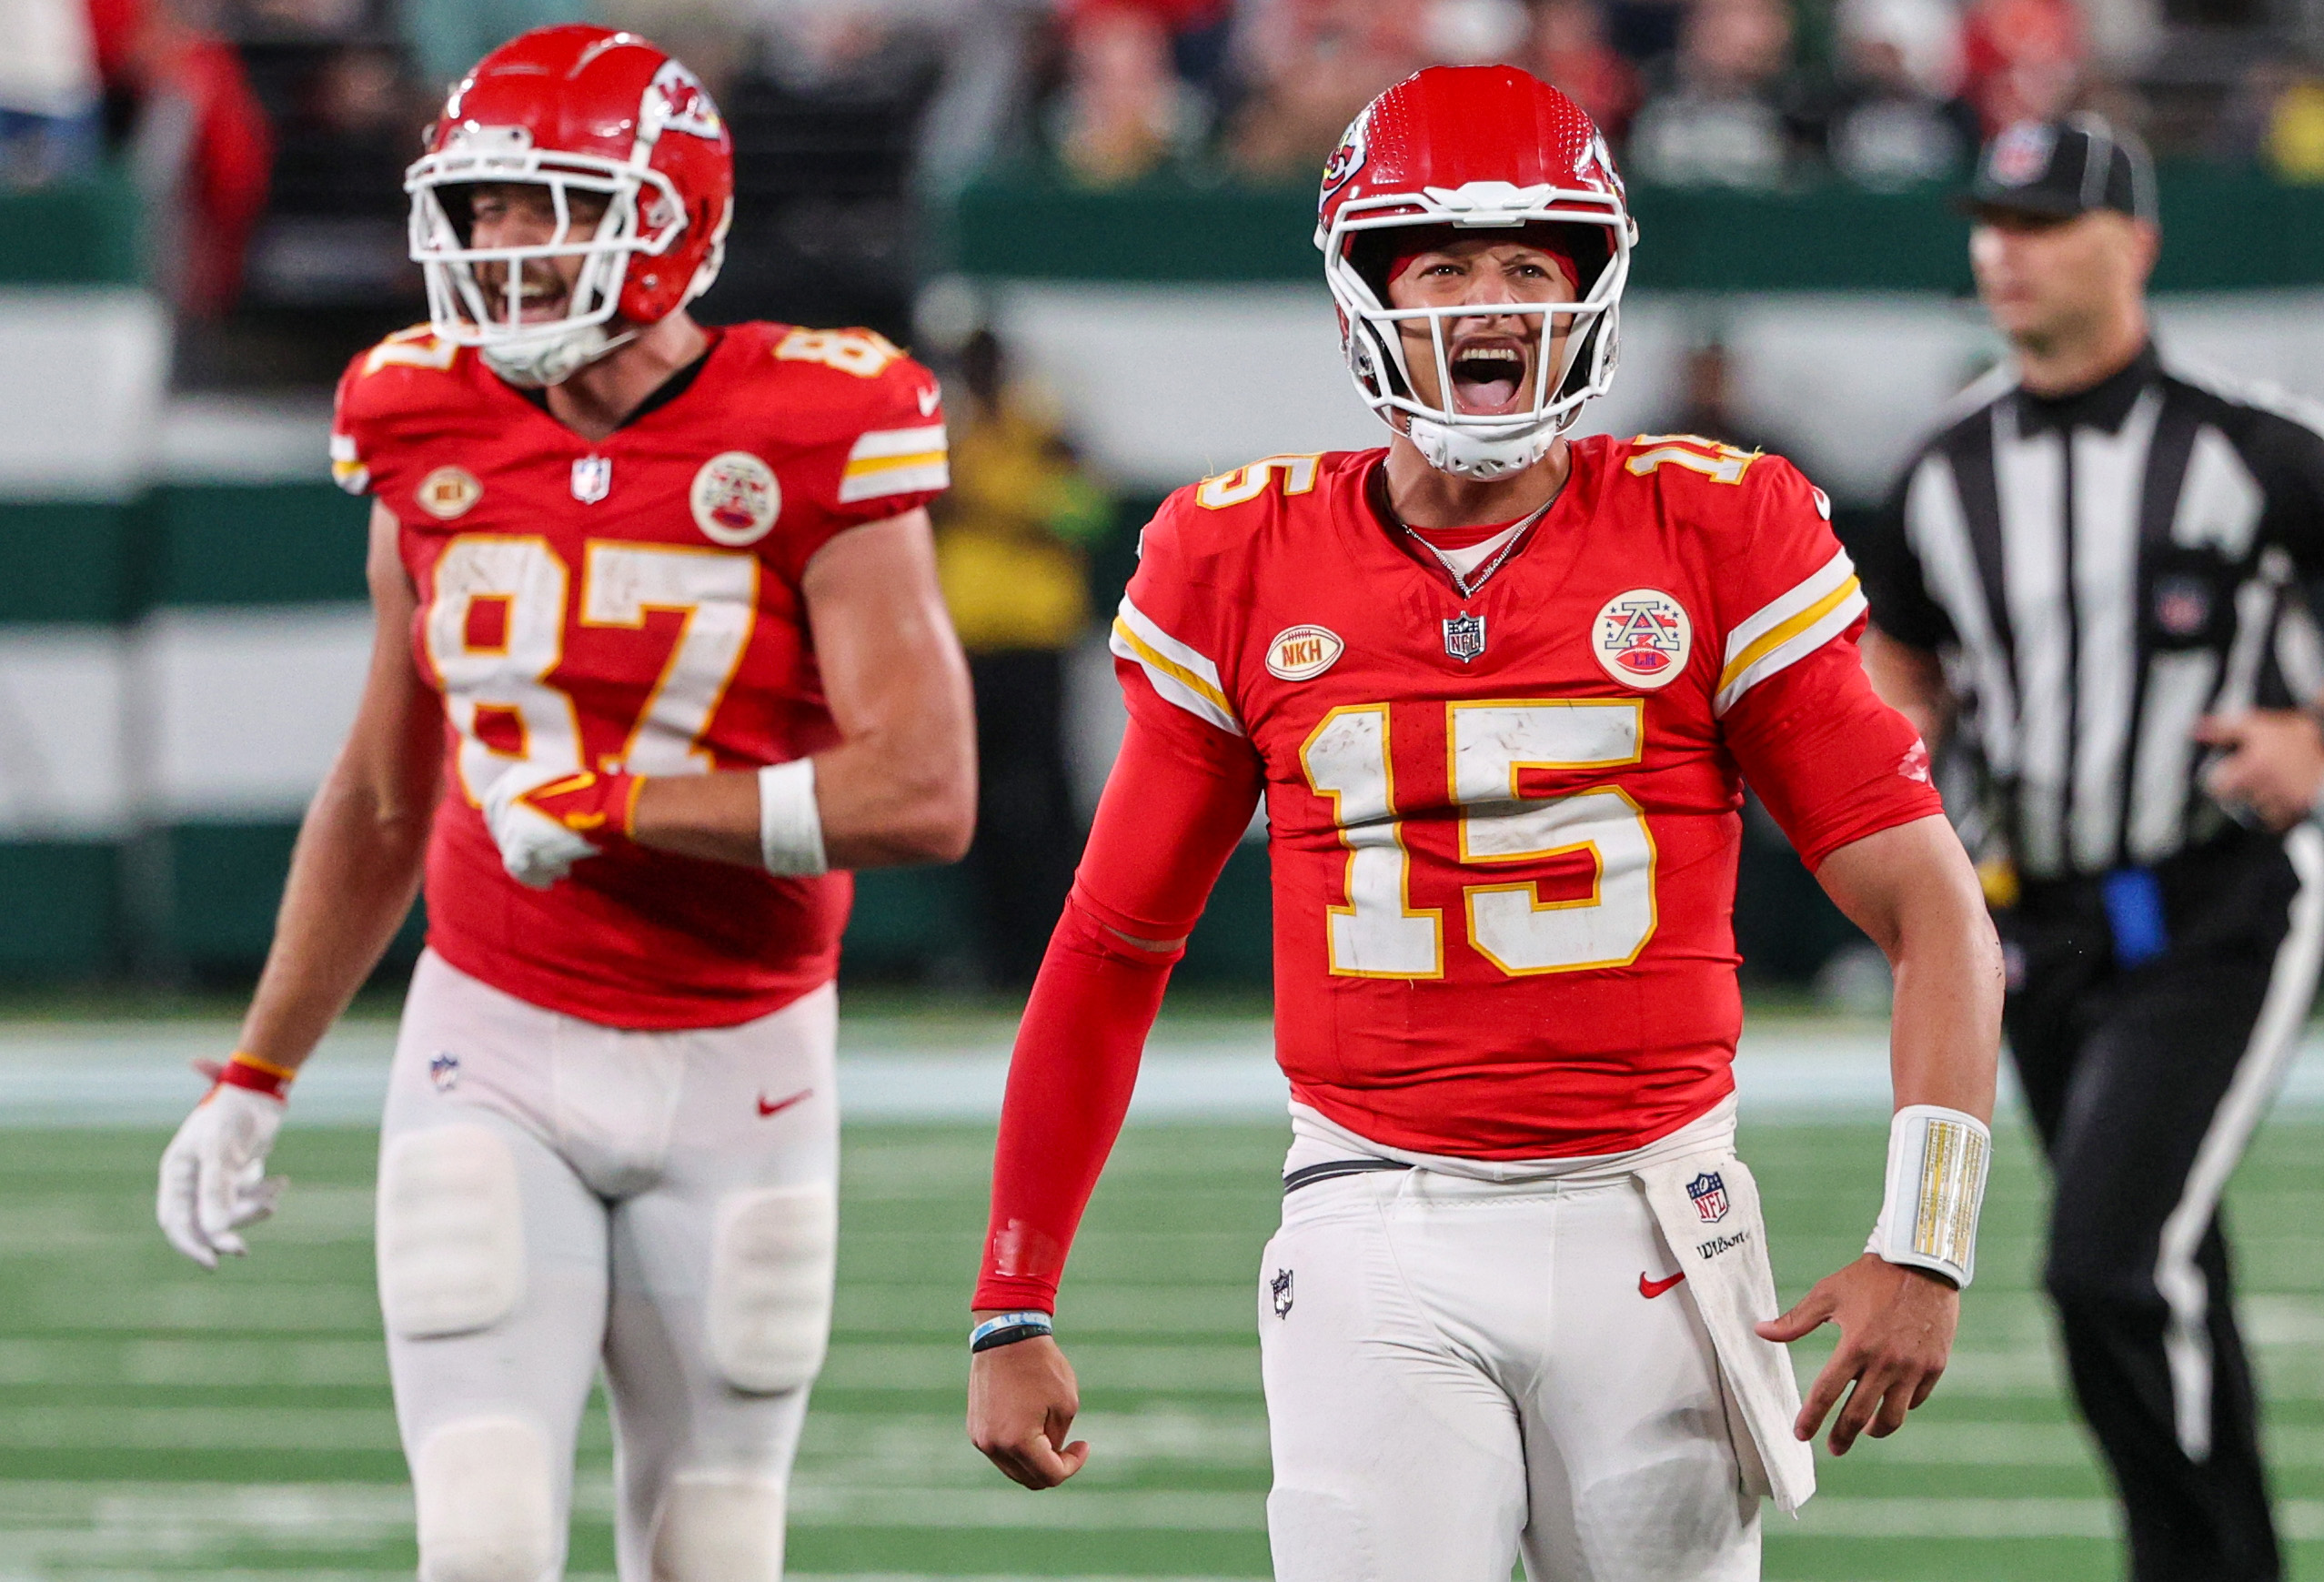 New York Jets vs. Kansas City Chiefs: How to watch NFL online, TV channel,  live stream info, start time 